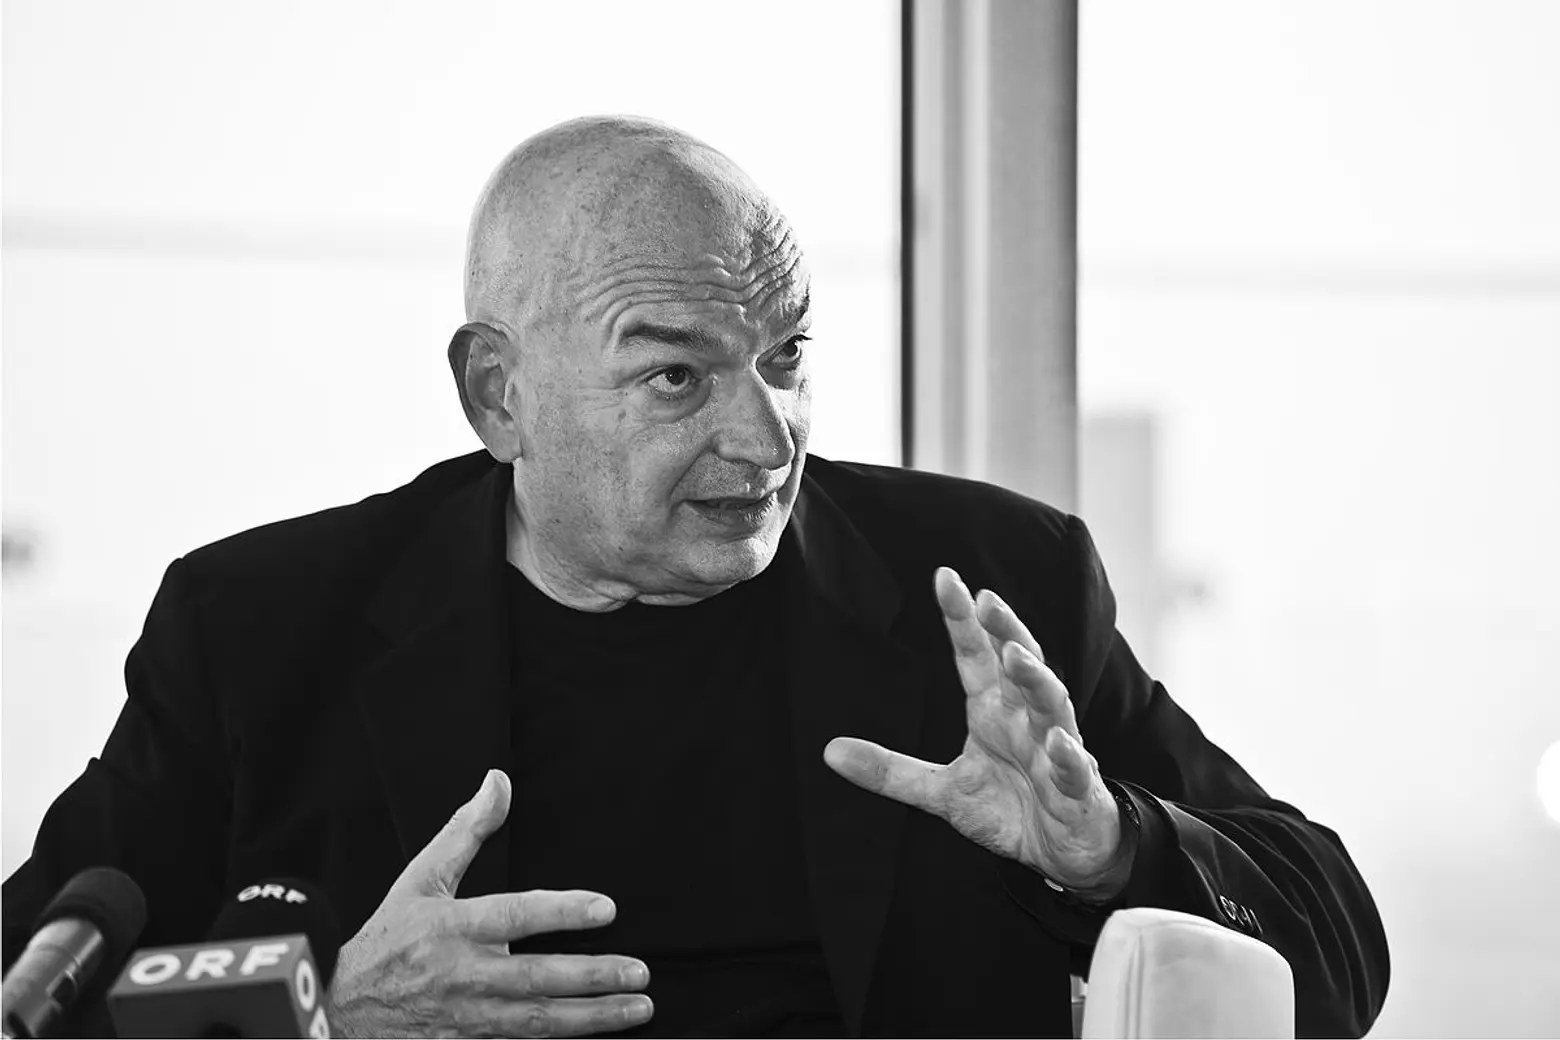 Sharif El-Gamal Commissions Jean Nouvel to Design Islam Museum Next to WTC